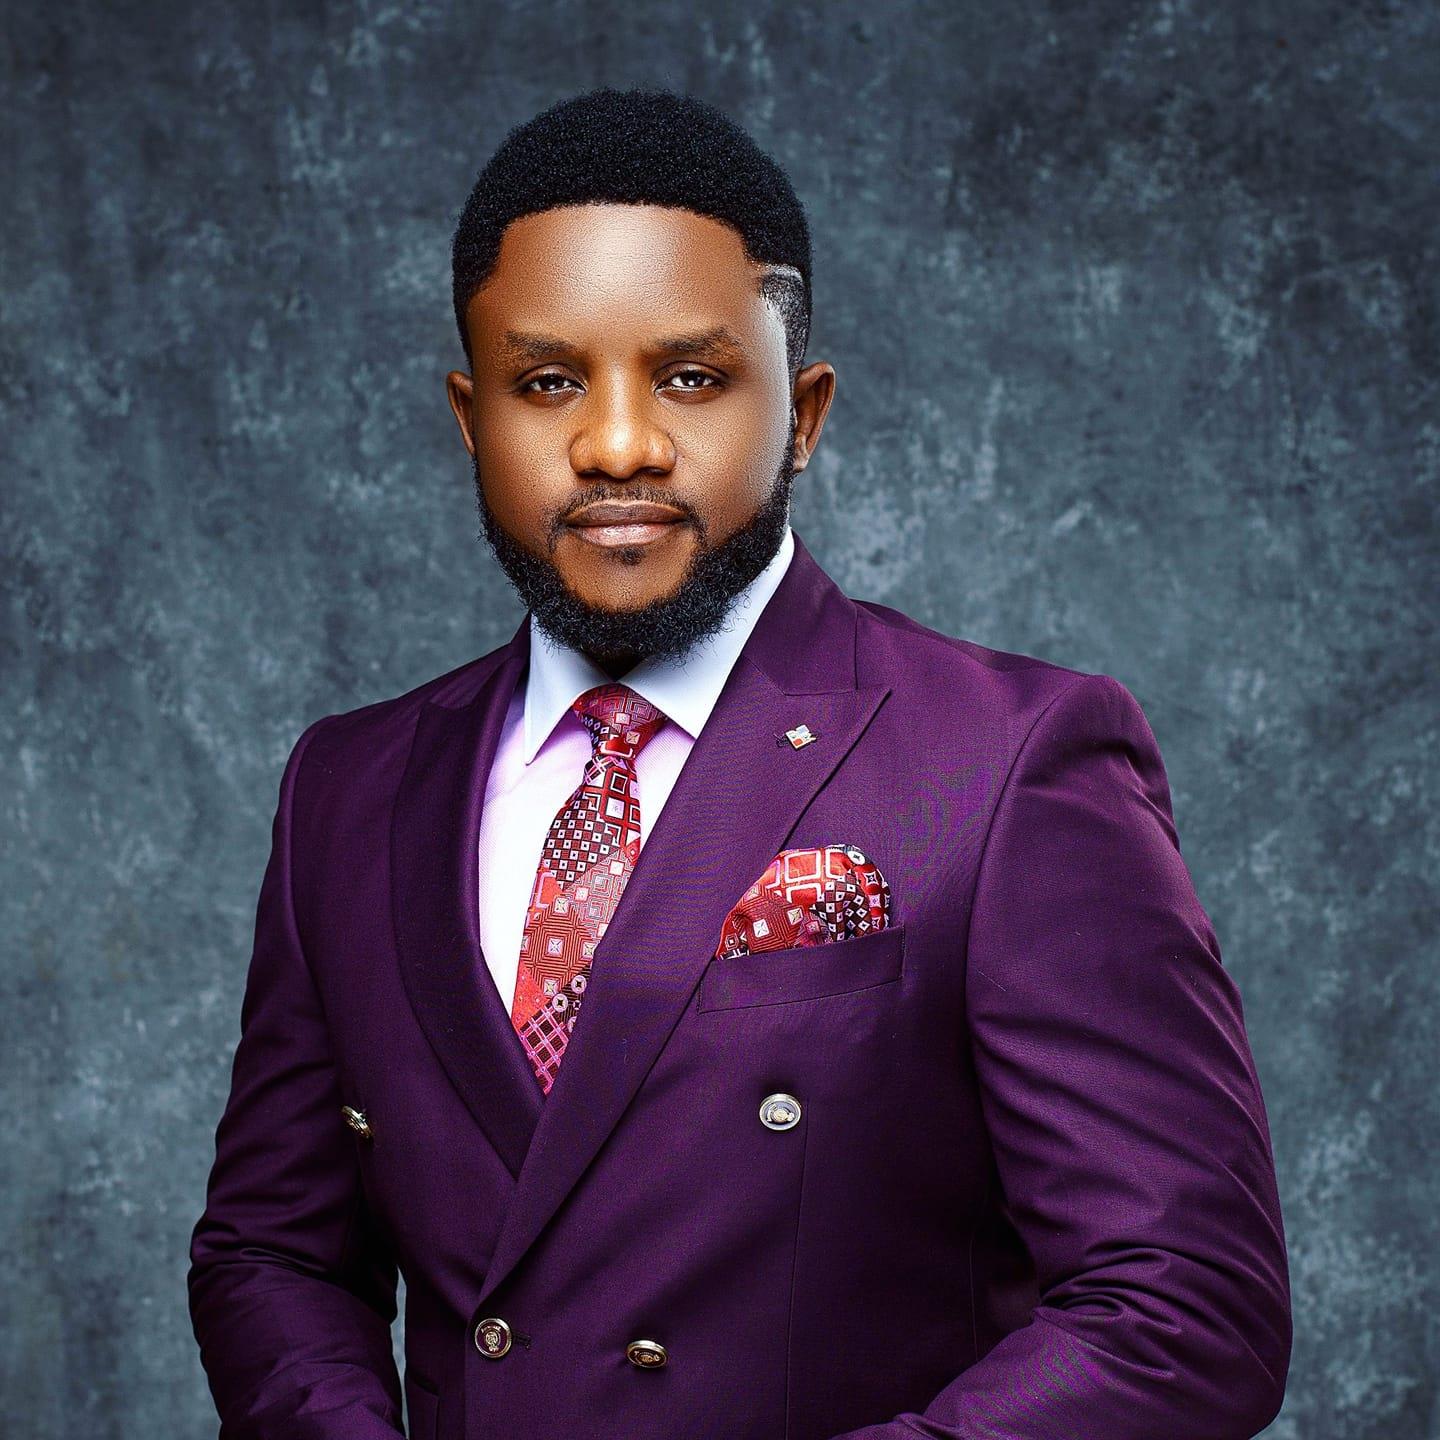 Official Profile And Biography Of Jimmy D Psalmist; Nationality, Education, Age, Real Name, Wife, Family and Career